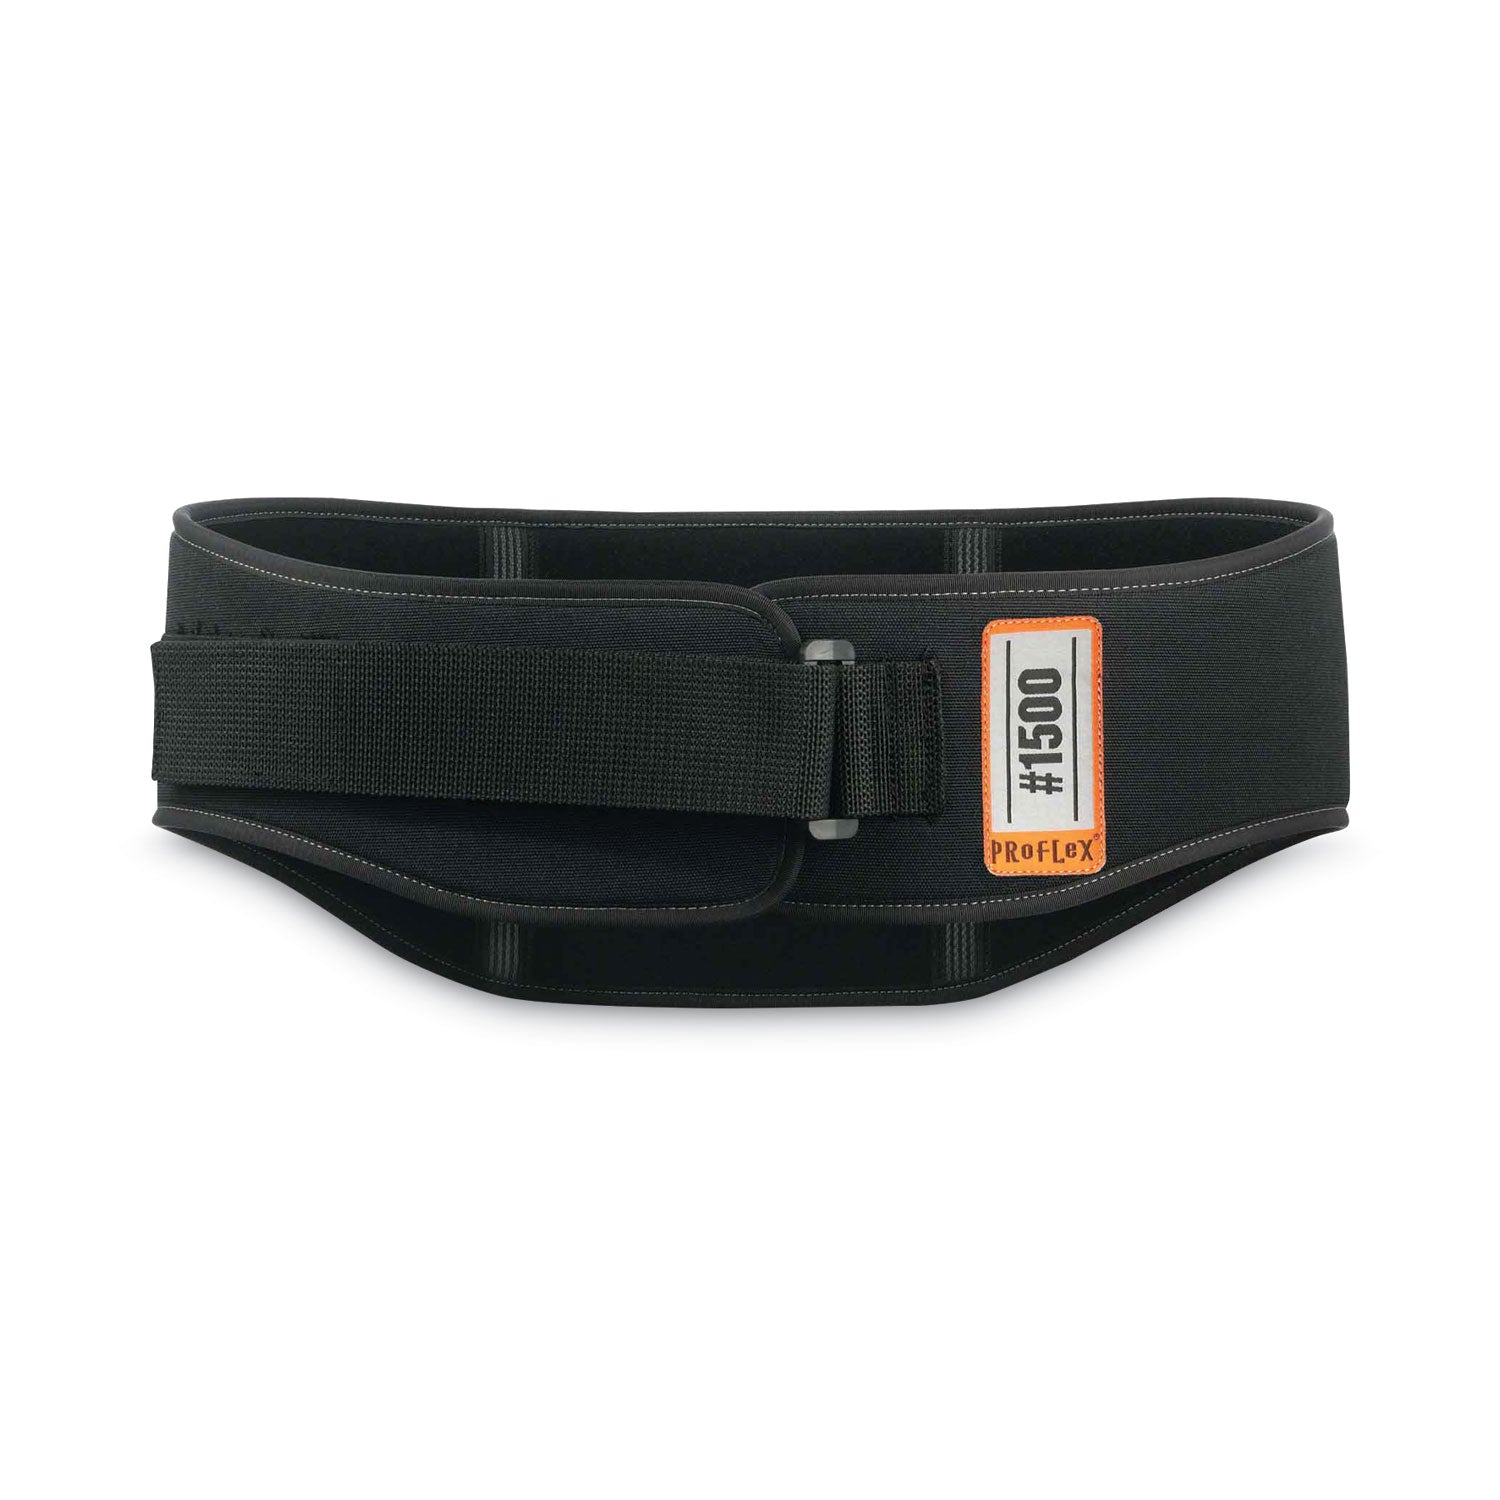 proflex-1500-weight-lifters-style-back-support-belt-small-25-to-30-waist-black-ships-in-1-3-business-days_ego11471 - 1